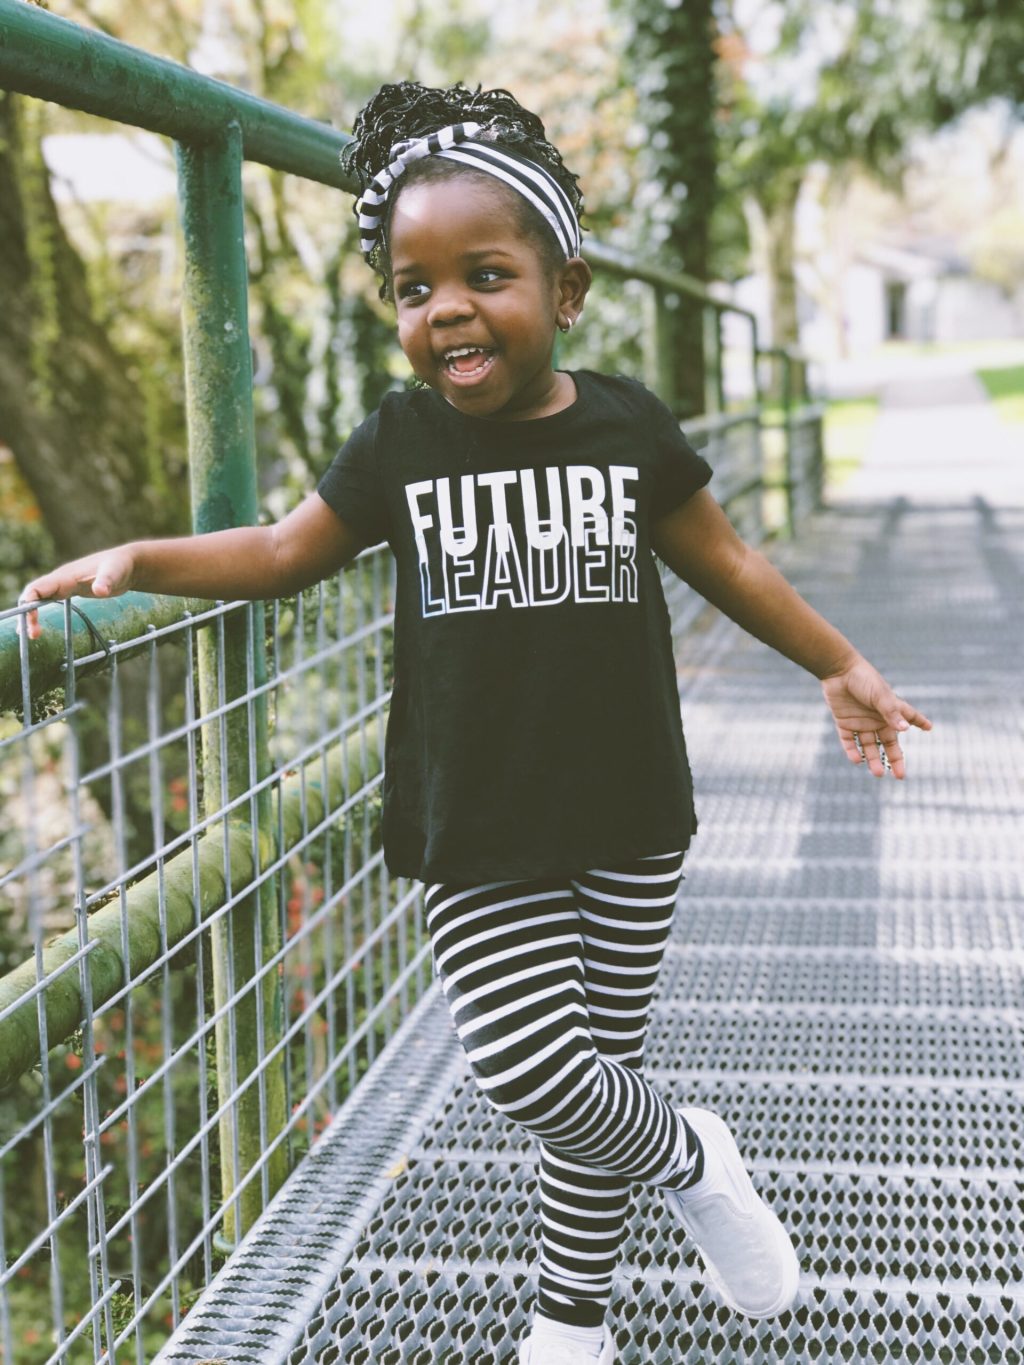 A young child standing on a bridge wearing a t-shirt reading "Future Leader"